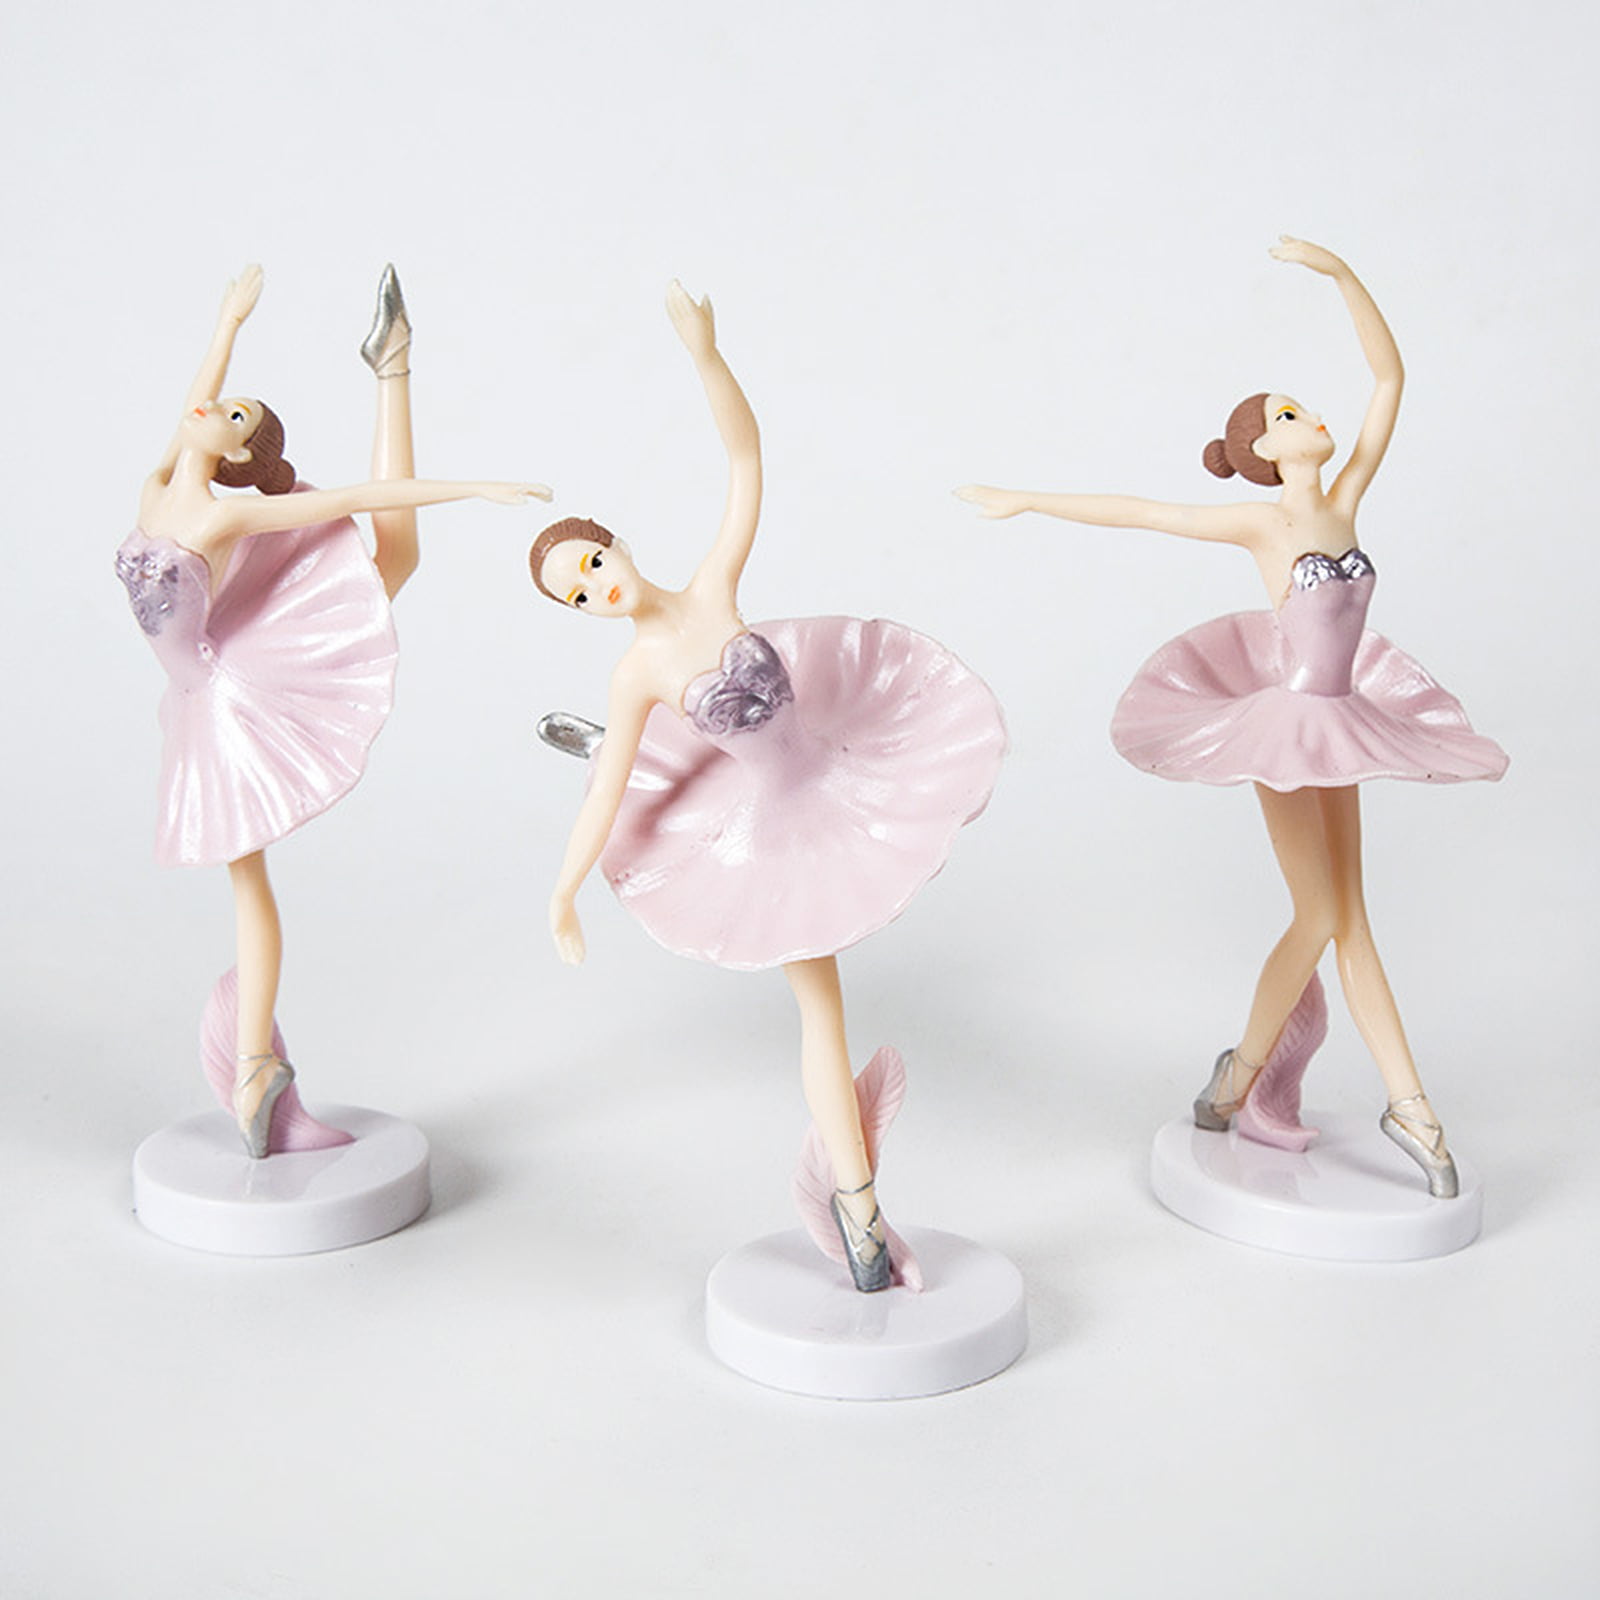 3 Ballerina Cakes That Are Sure to Be the Hit of Your Next Studio Party -  Dance Teacher